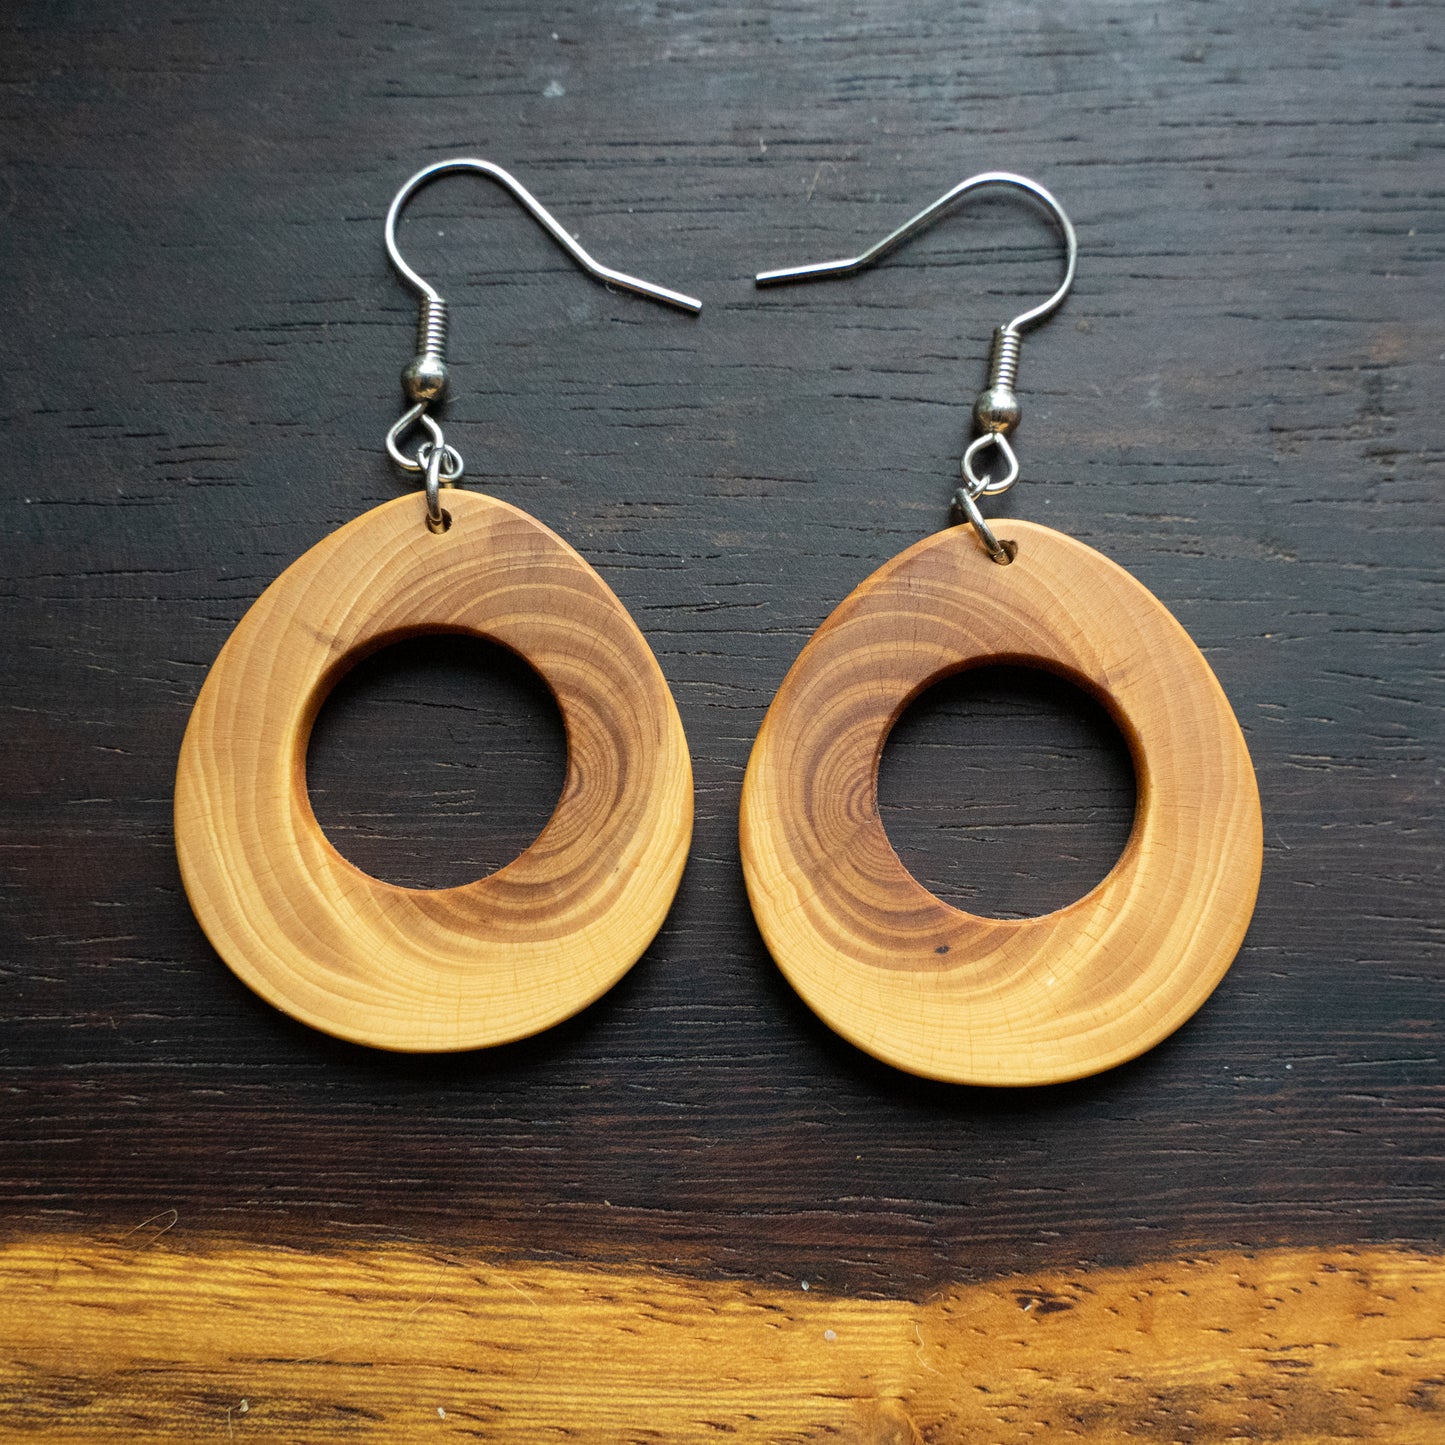 Earrings made from local wood